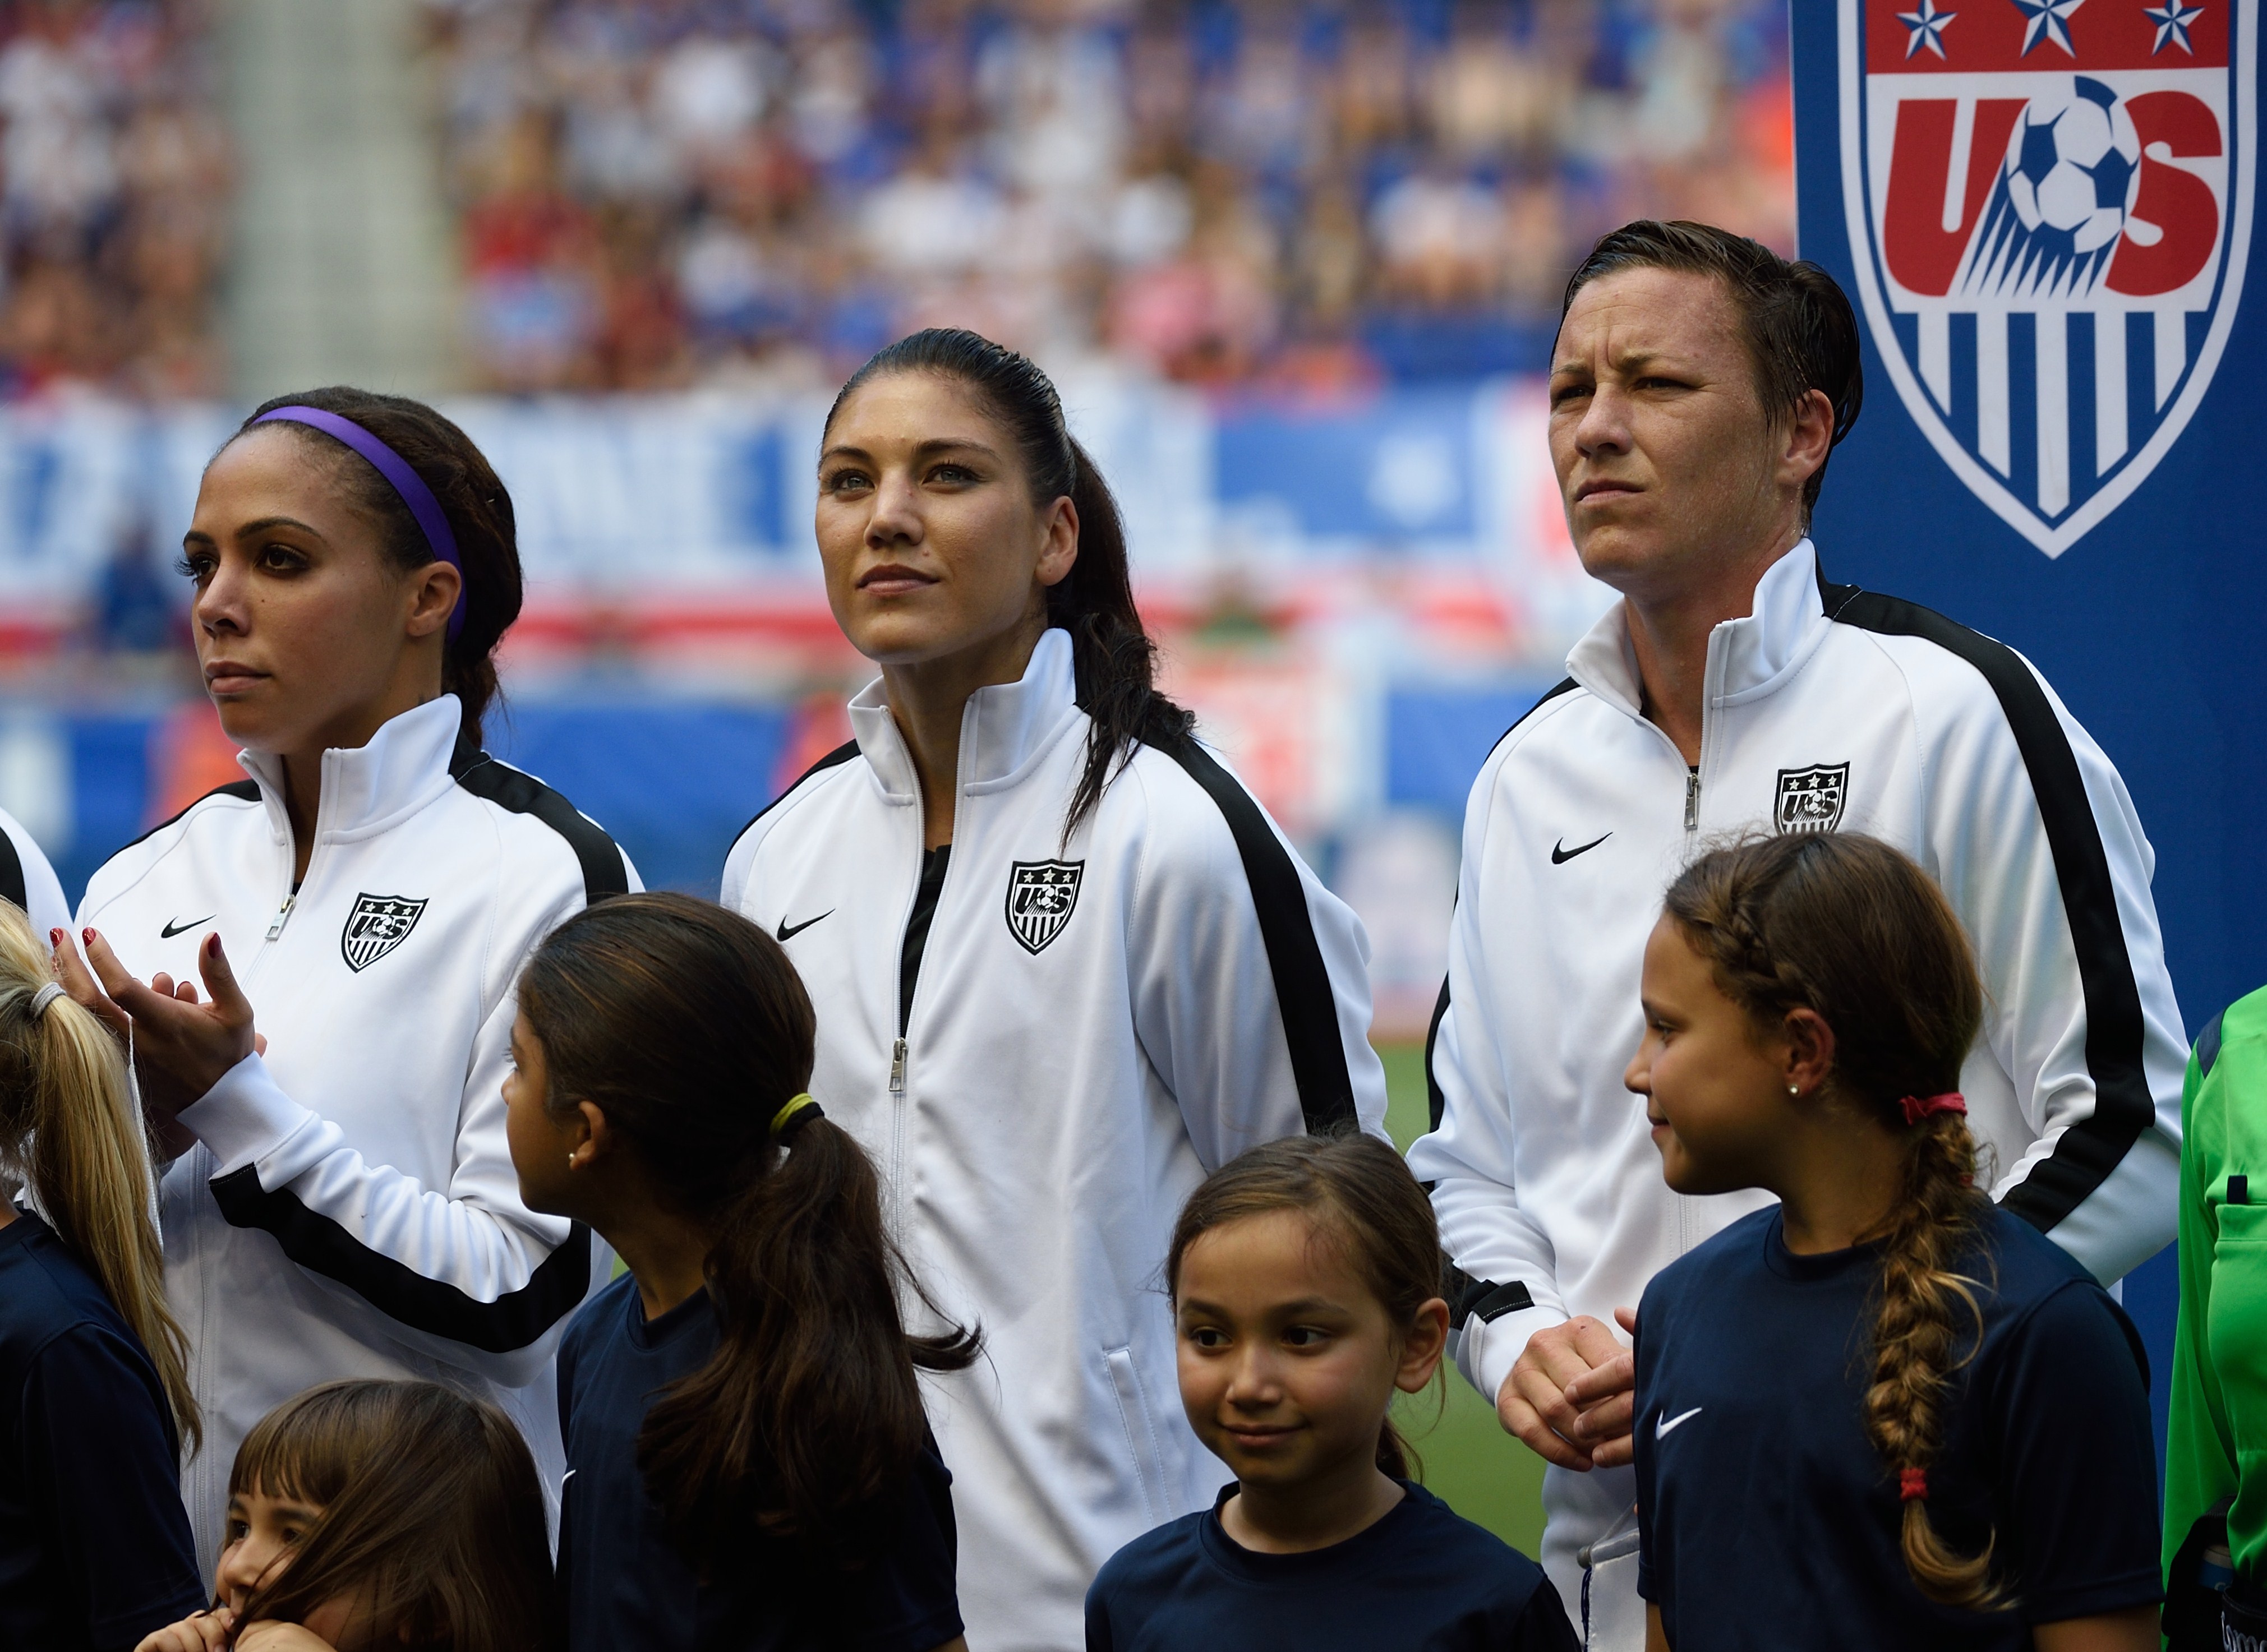 Why Don't Female Soccer Players Get Equal Pay? Inside The Economics Of